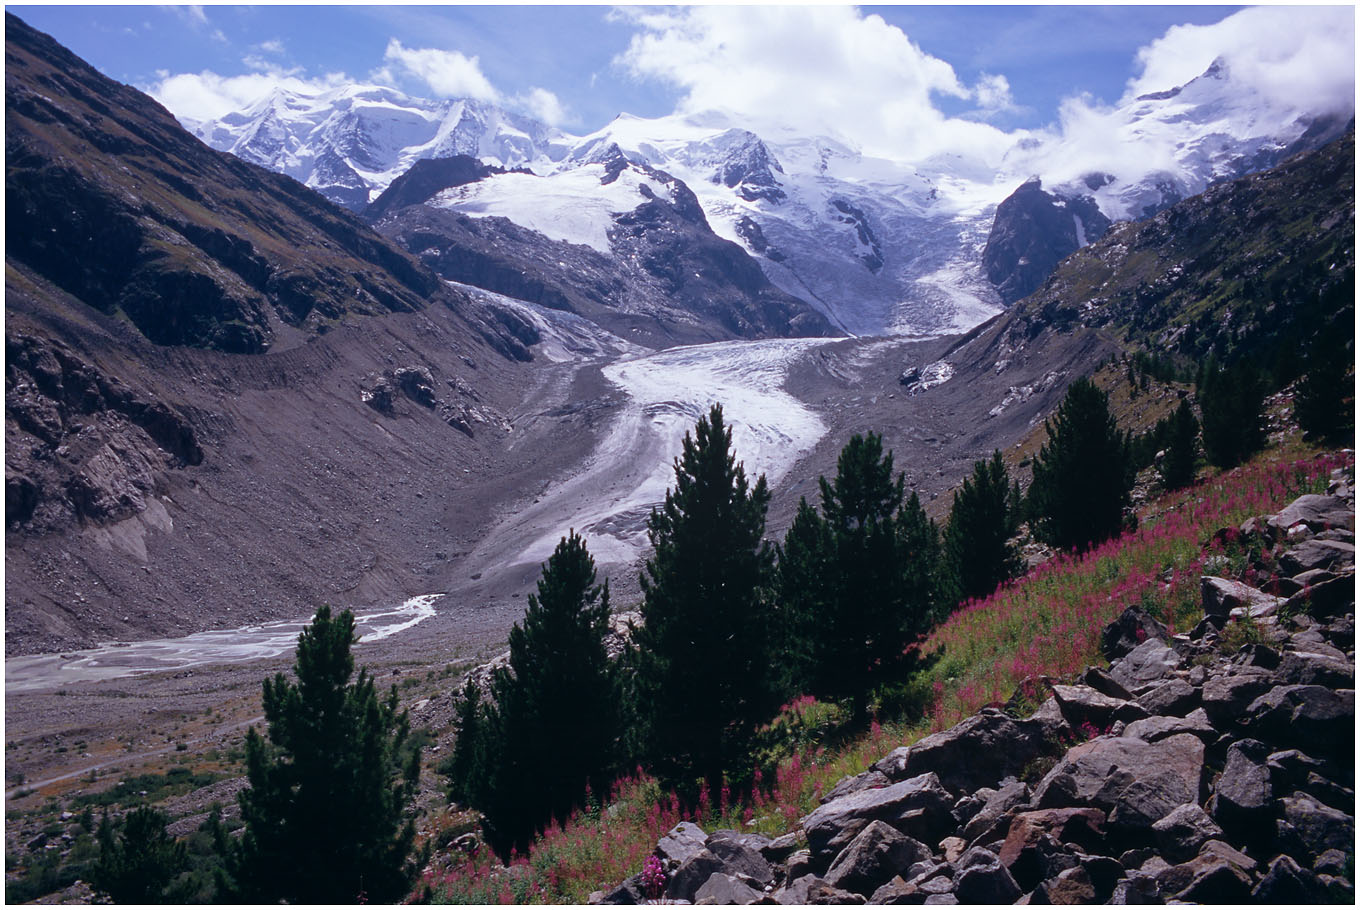 Artificial snow might save a glacier in the Swiss Alps